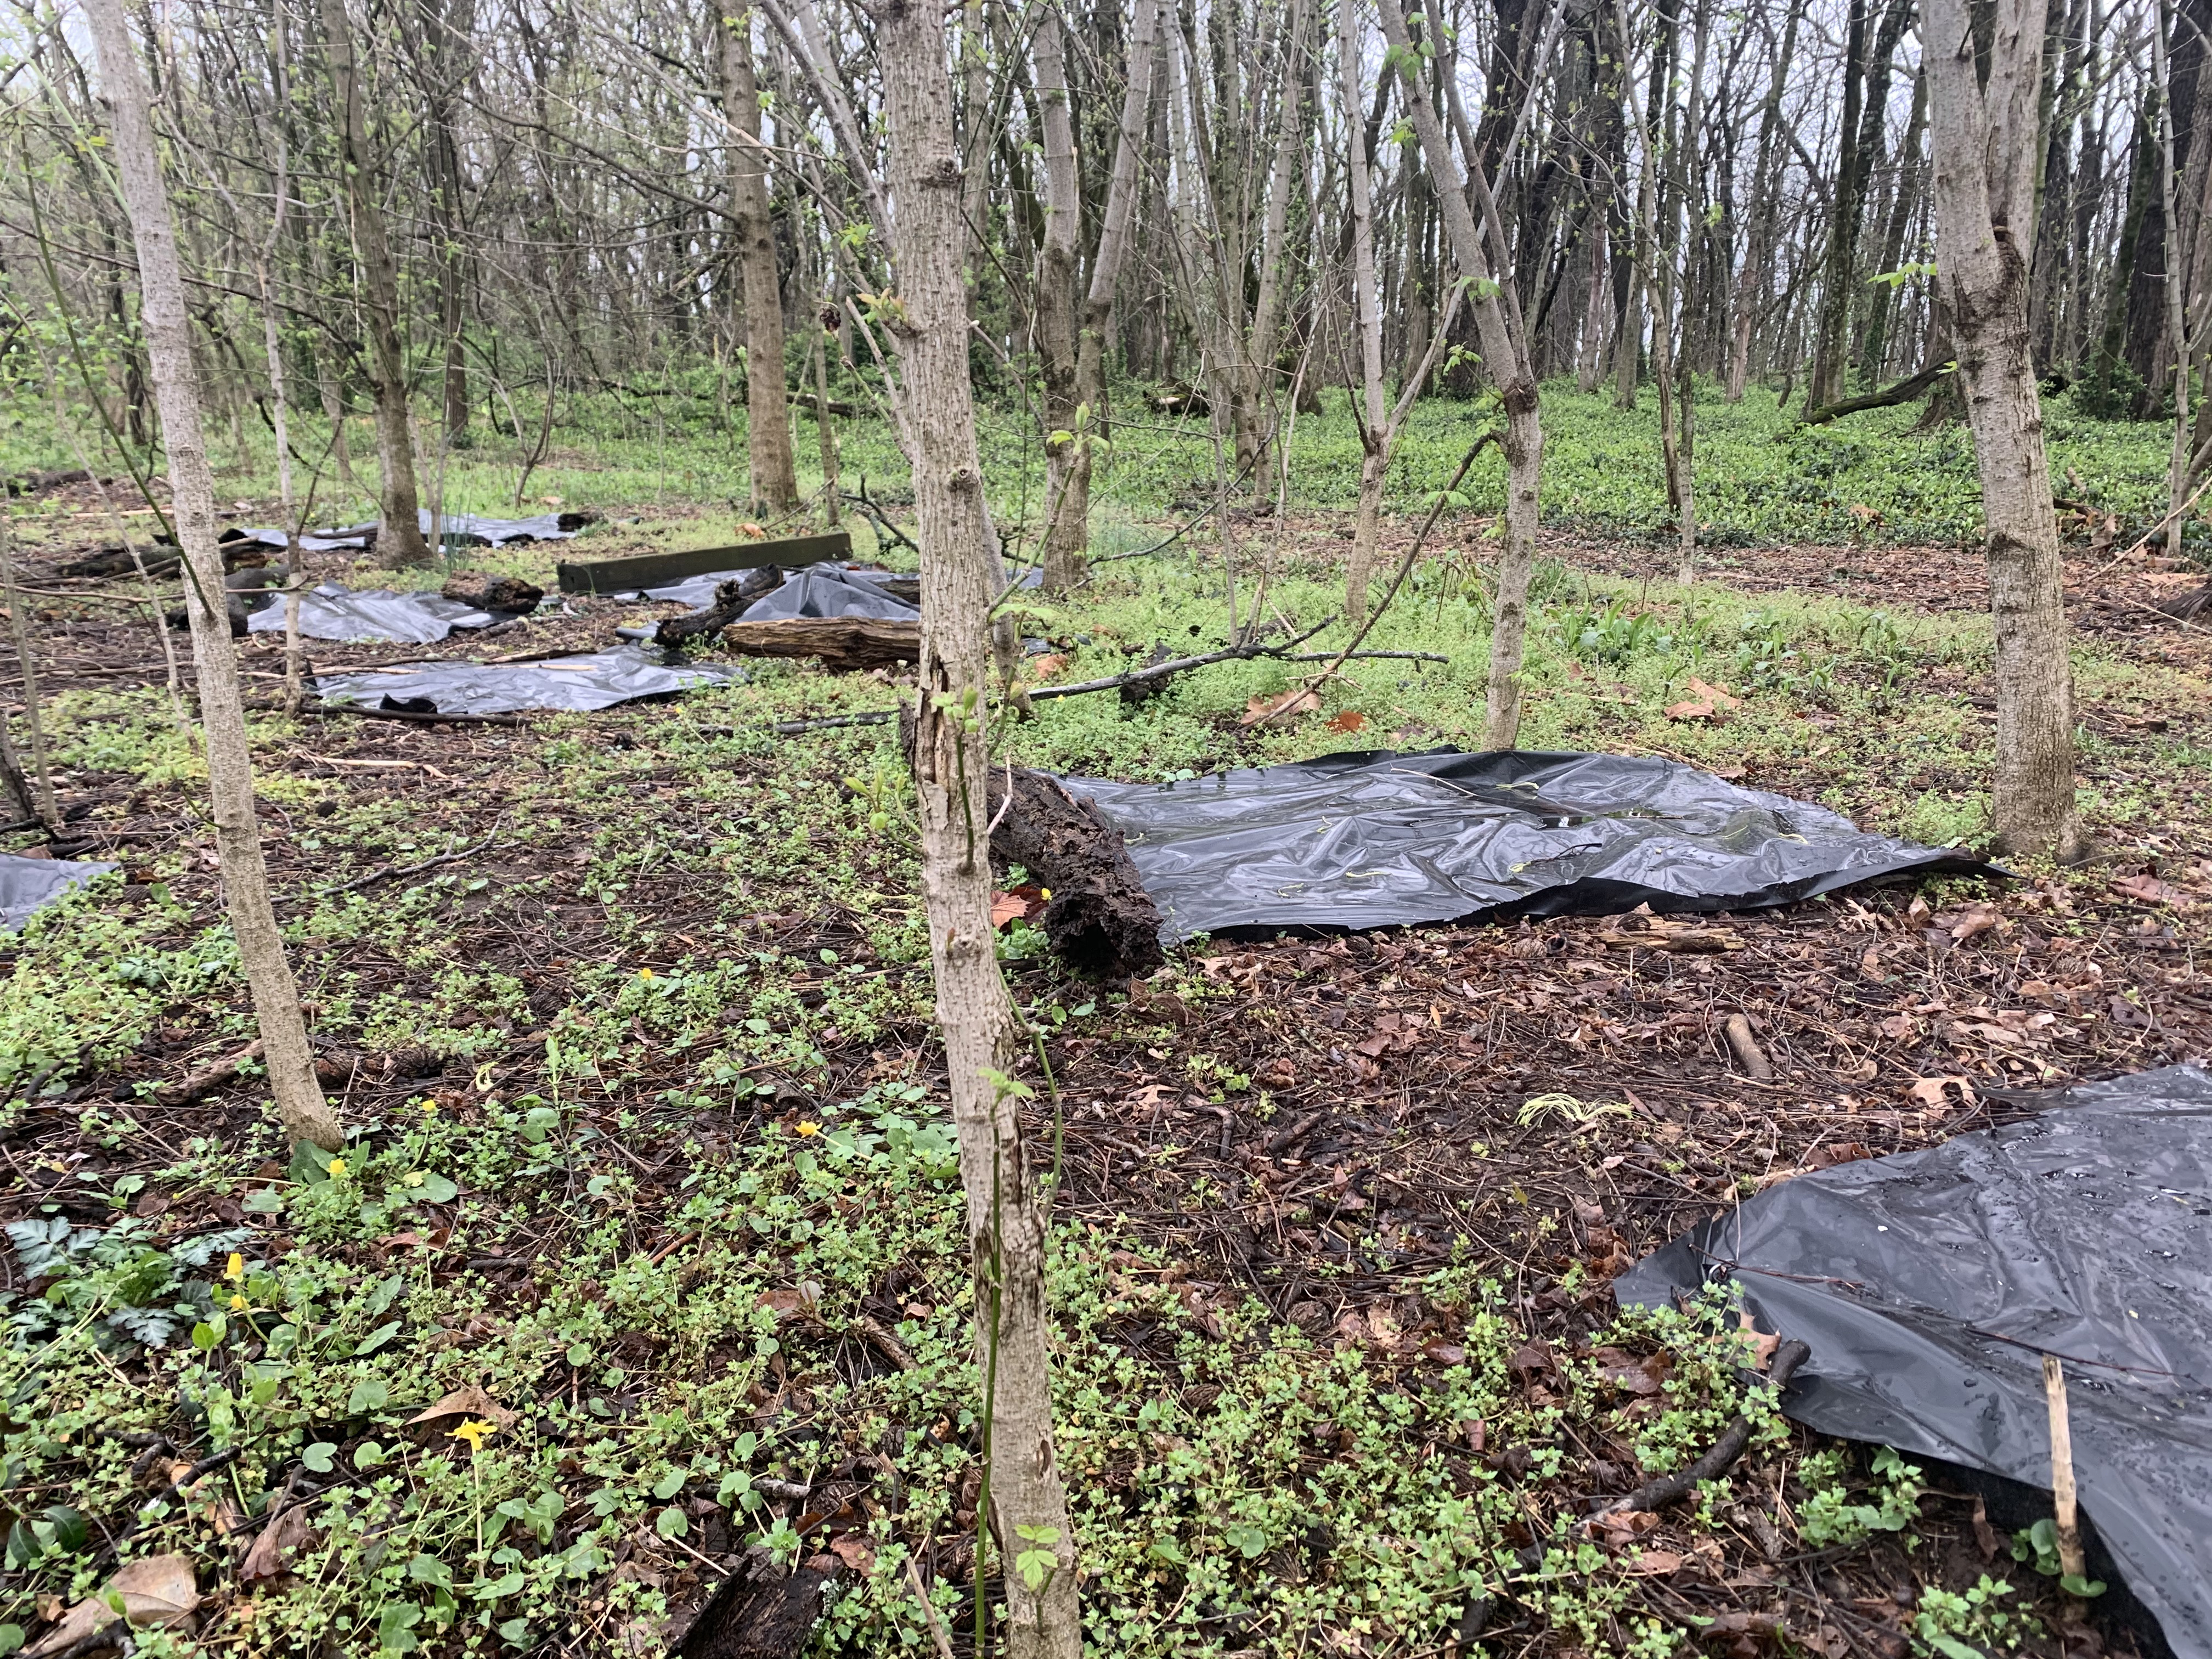 After covering the plants with black tarps to solarize the soil, in 2021 lesser celandine is in far less profusion than two years earlier. Photo by Ellen Crocker